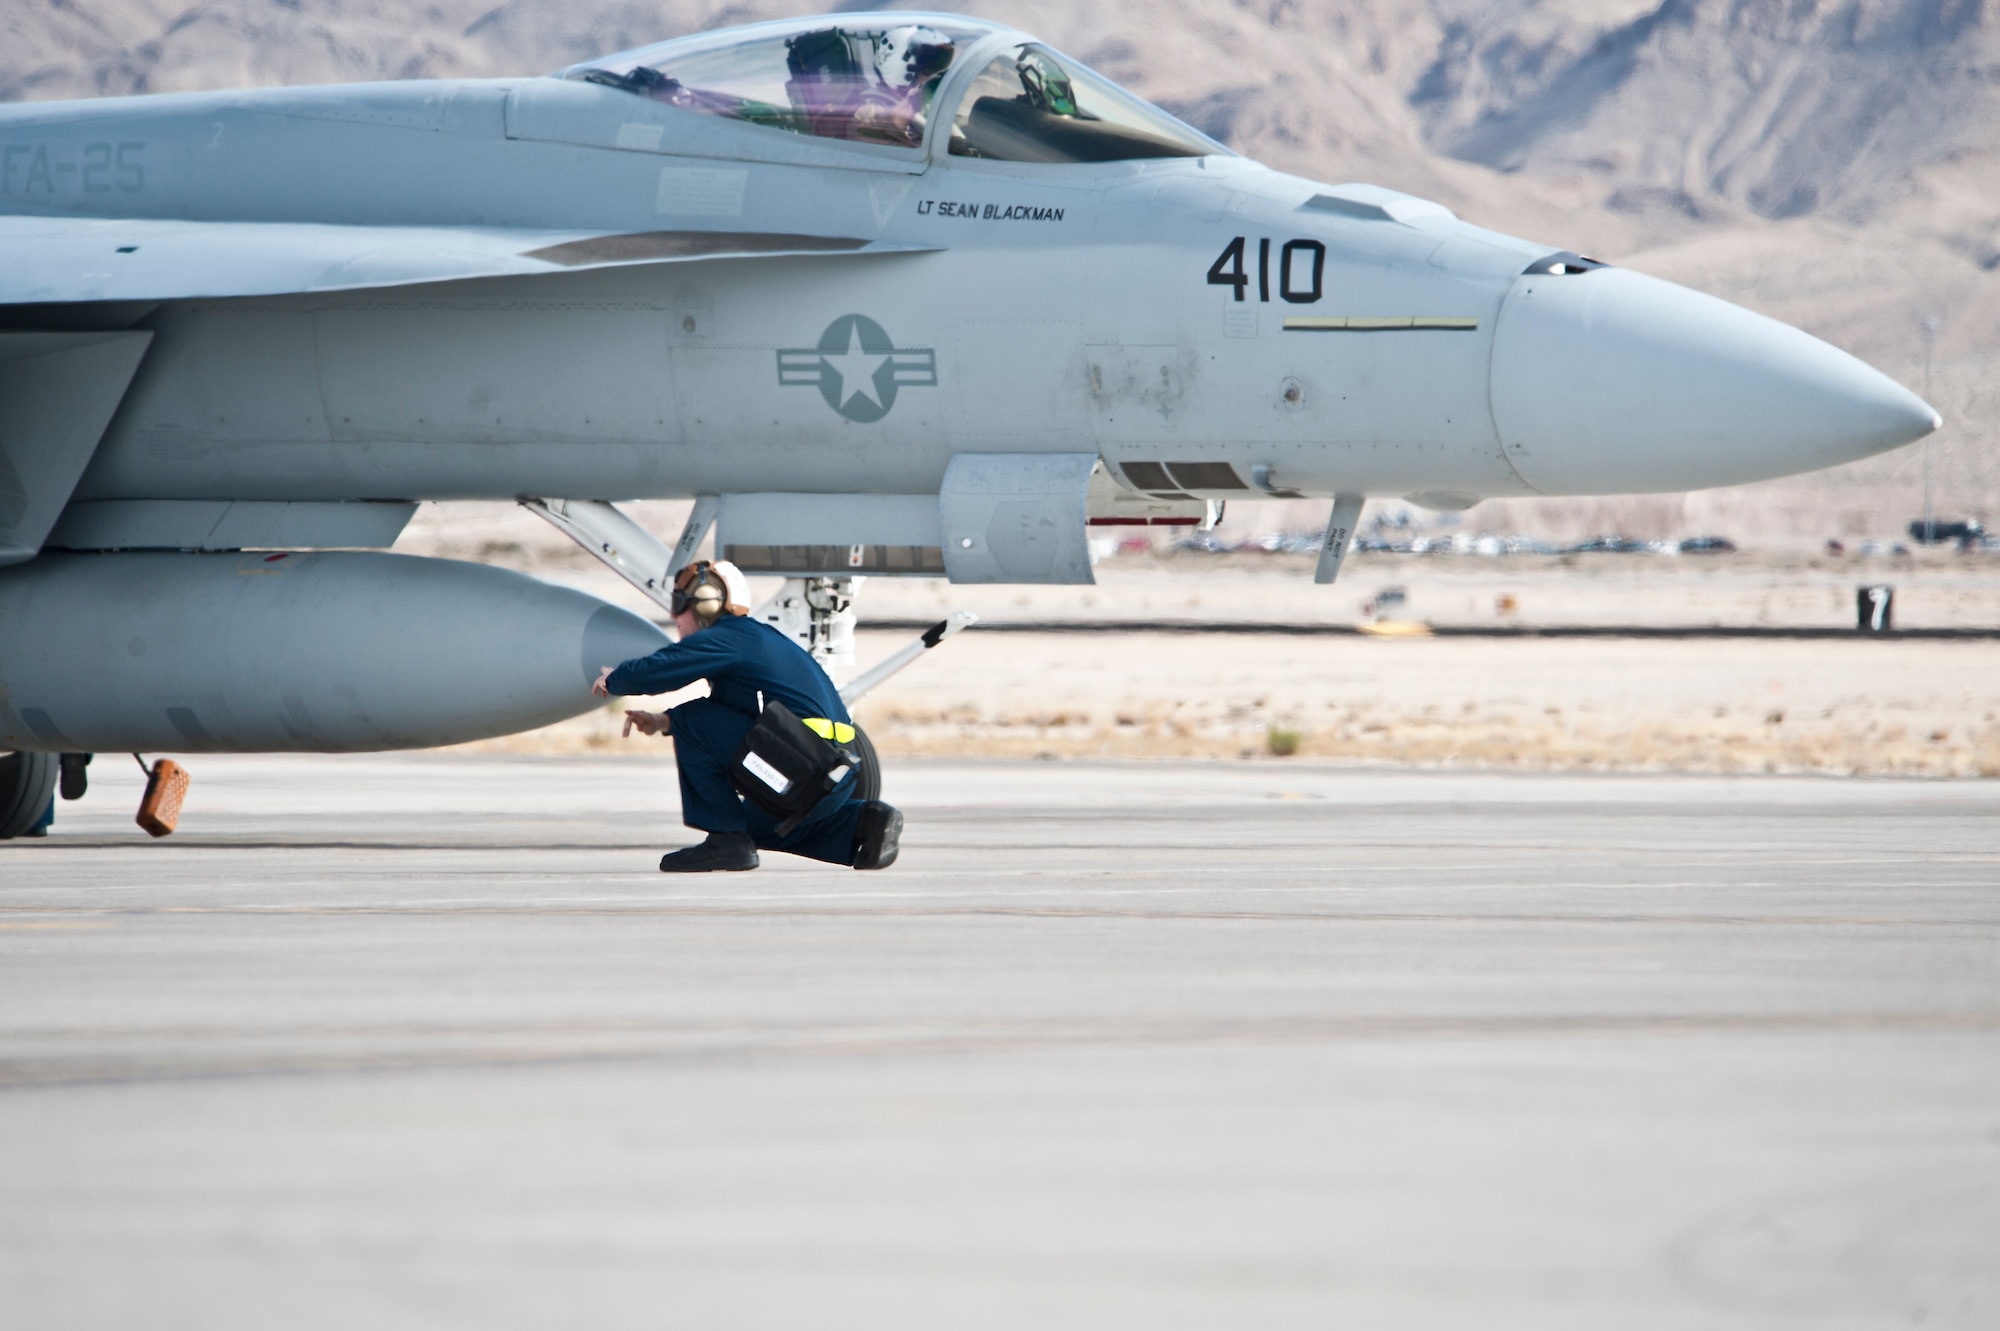 U.S. Navy Airman Ryan Merrifield, Strike Fighter Squadron 25 (VFA-25), Naval Air Station, Lemoore, Calif., plane captain, signals all clear below the F/A-18E Hornet prior to the aircraft taxiing onto the Nellis Air Force Base, Nev. active runway Jan. 25, 2013. The U.S. Navy’s participation in Red Flag 13-2 is to maximize their air combat readiness in a joint air-to-air training environment. (U.S. Air Force photo by Lawrence Crespo)